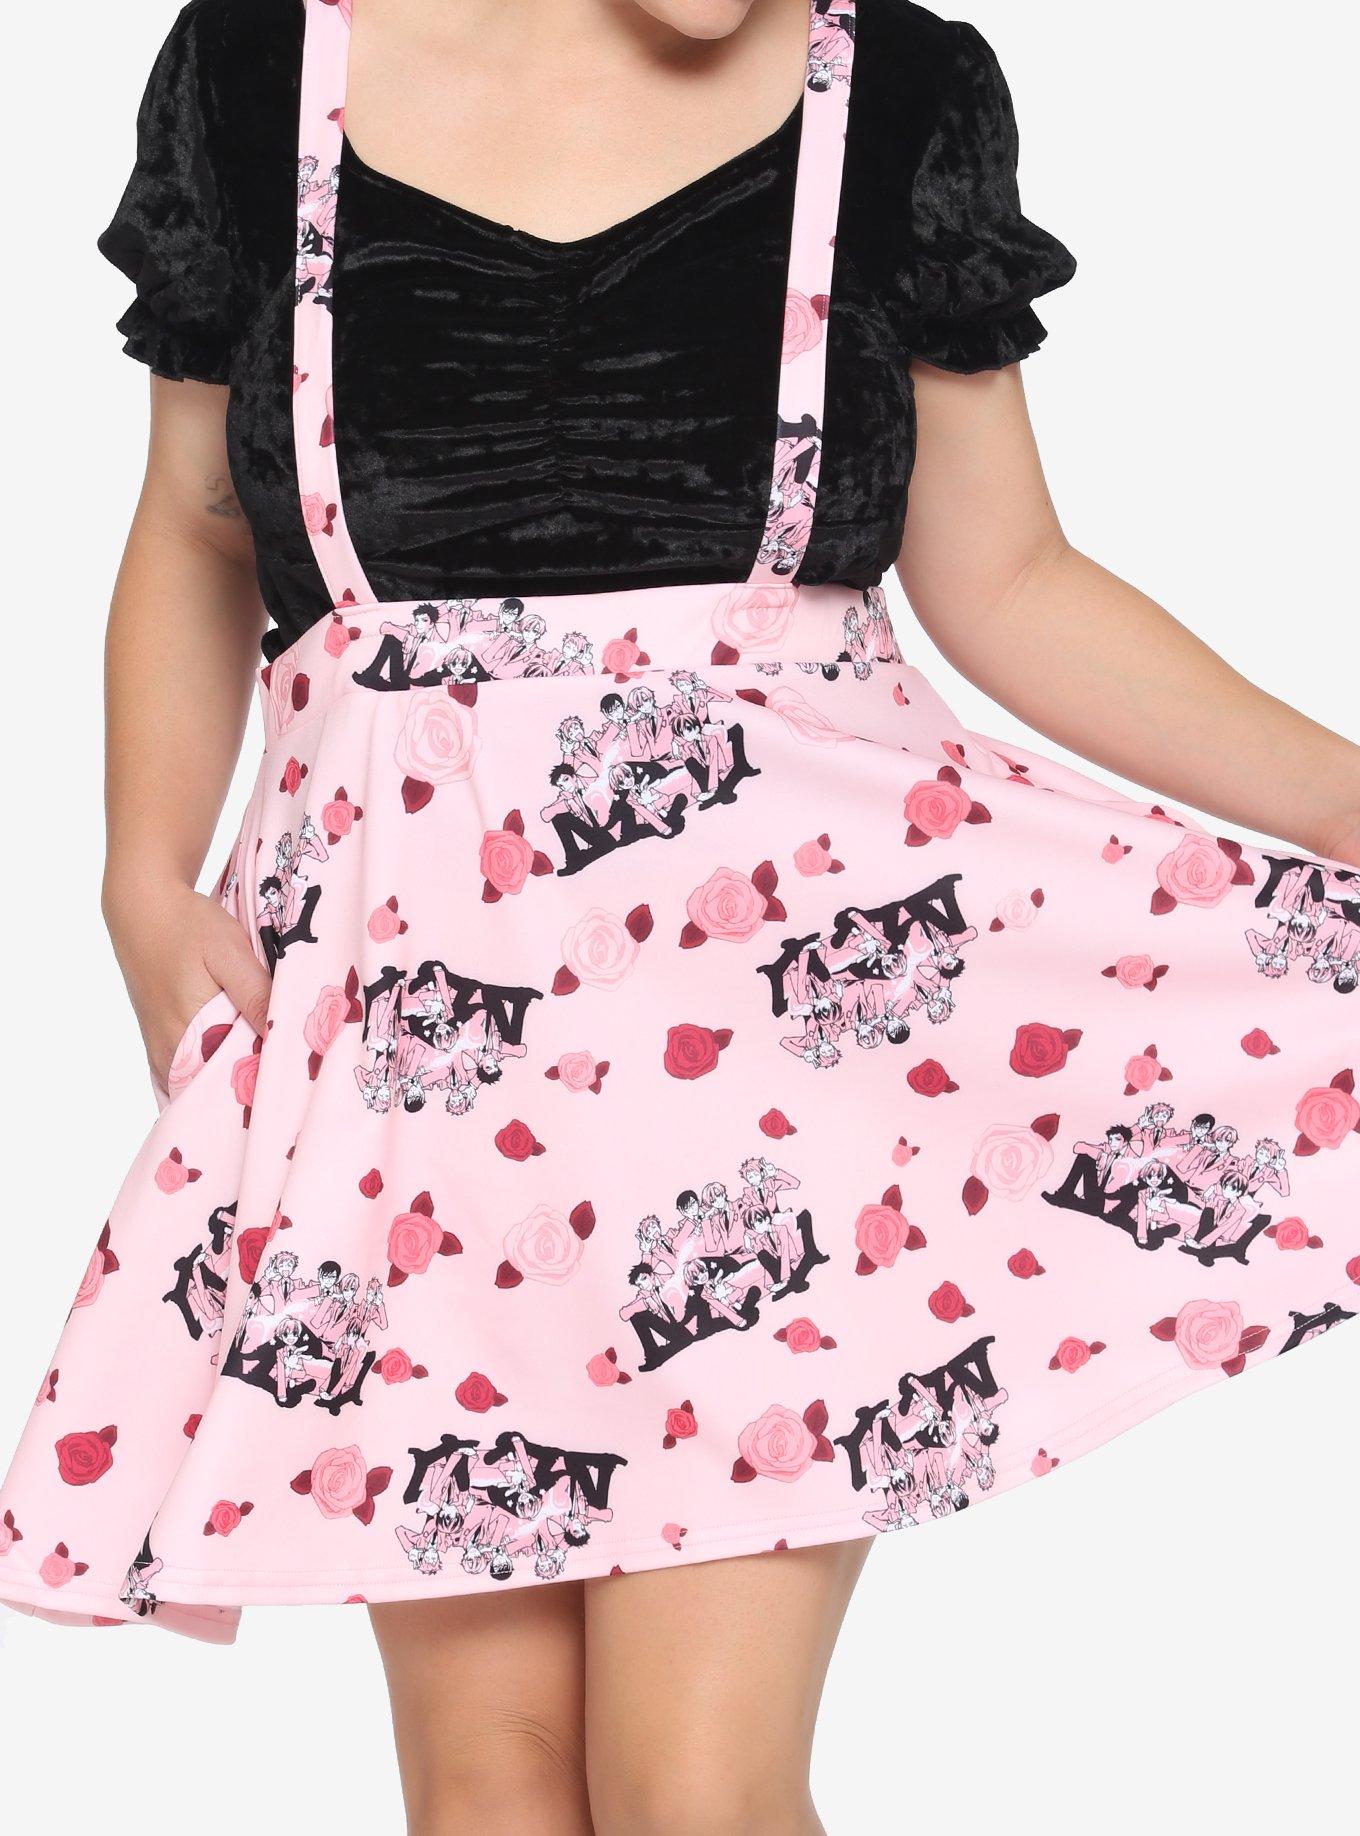 Ouran High School Host Club Roses Suspender Skirt Plus Size, PINK, hi-res